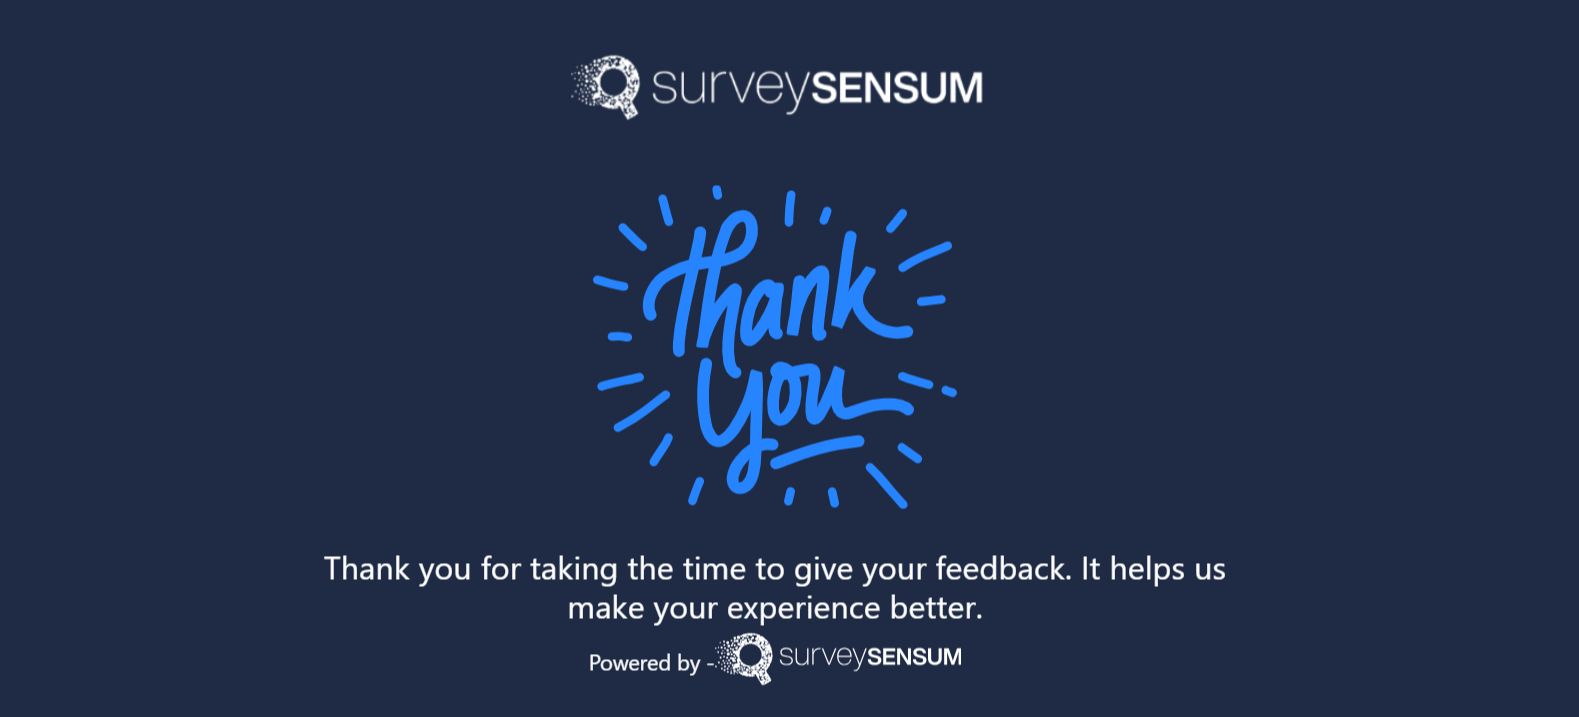 This is the image of the survey redirect feature of SurveySensum where respondents are redirected to a thank you page.